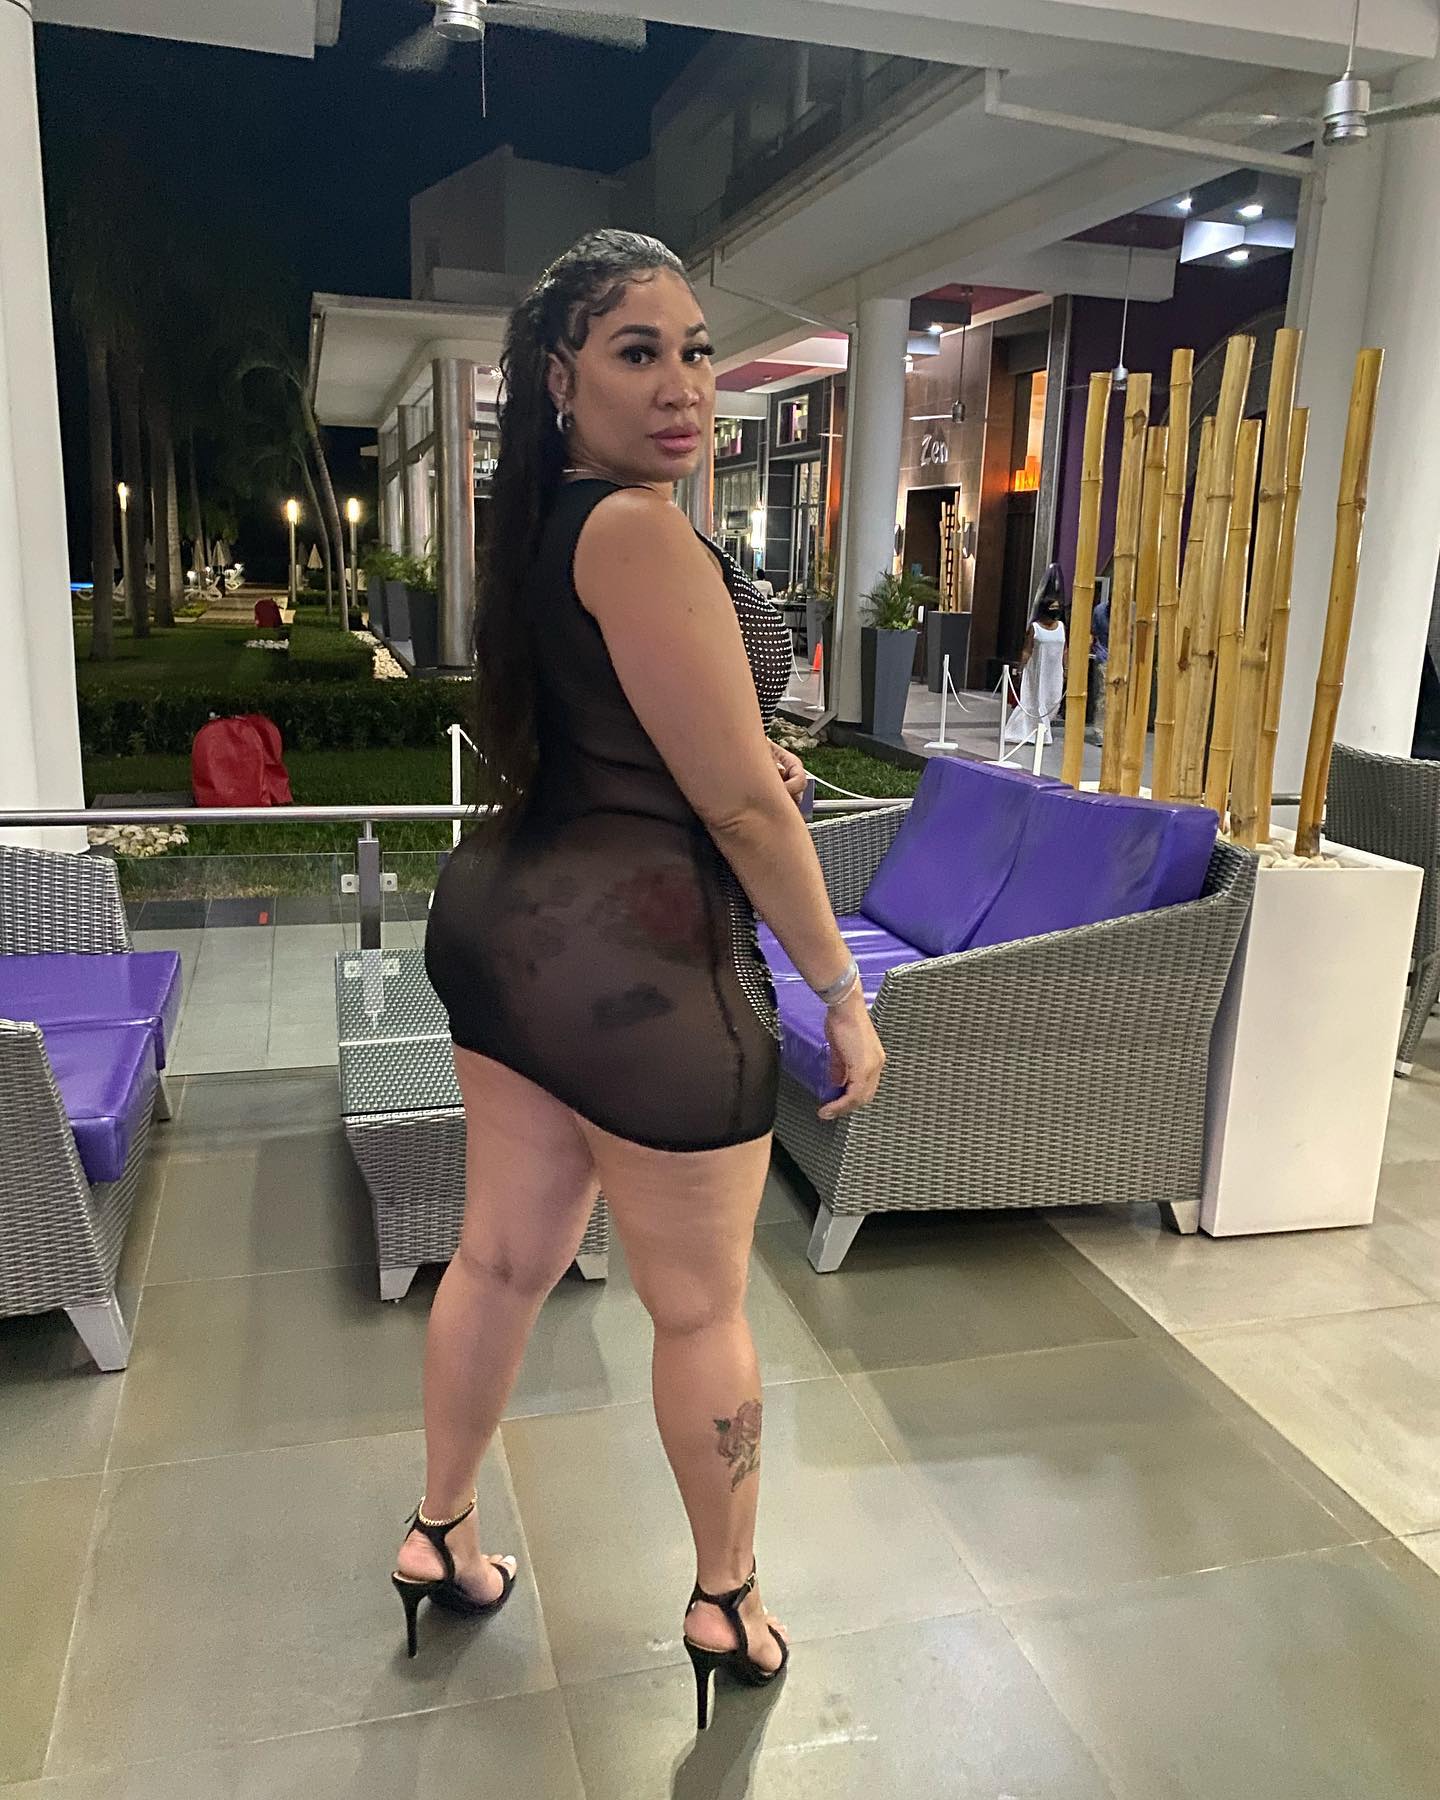 🖤 185lbs with a lil bit of cellulite 💋 
No filter No edits❤️‍🔥